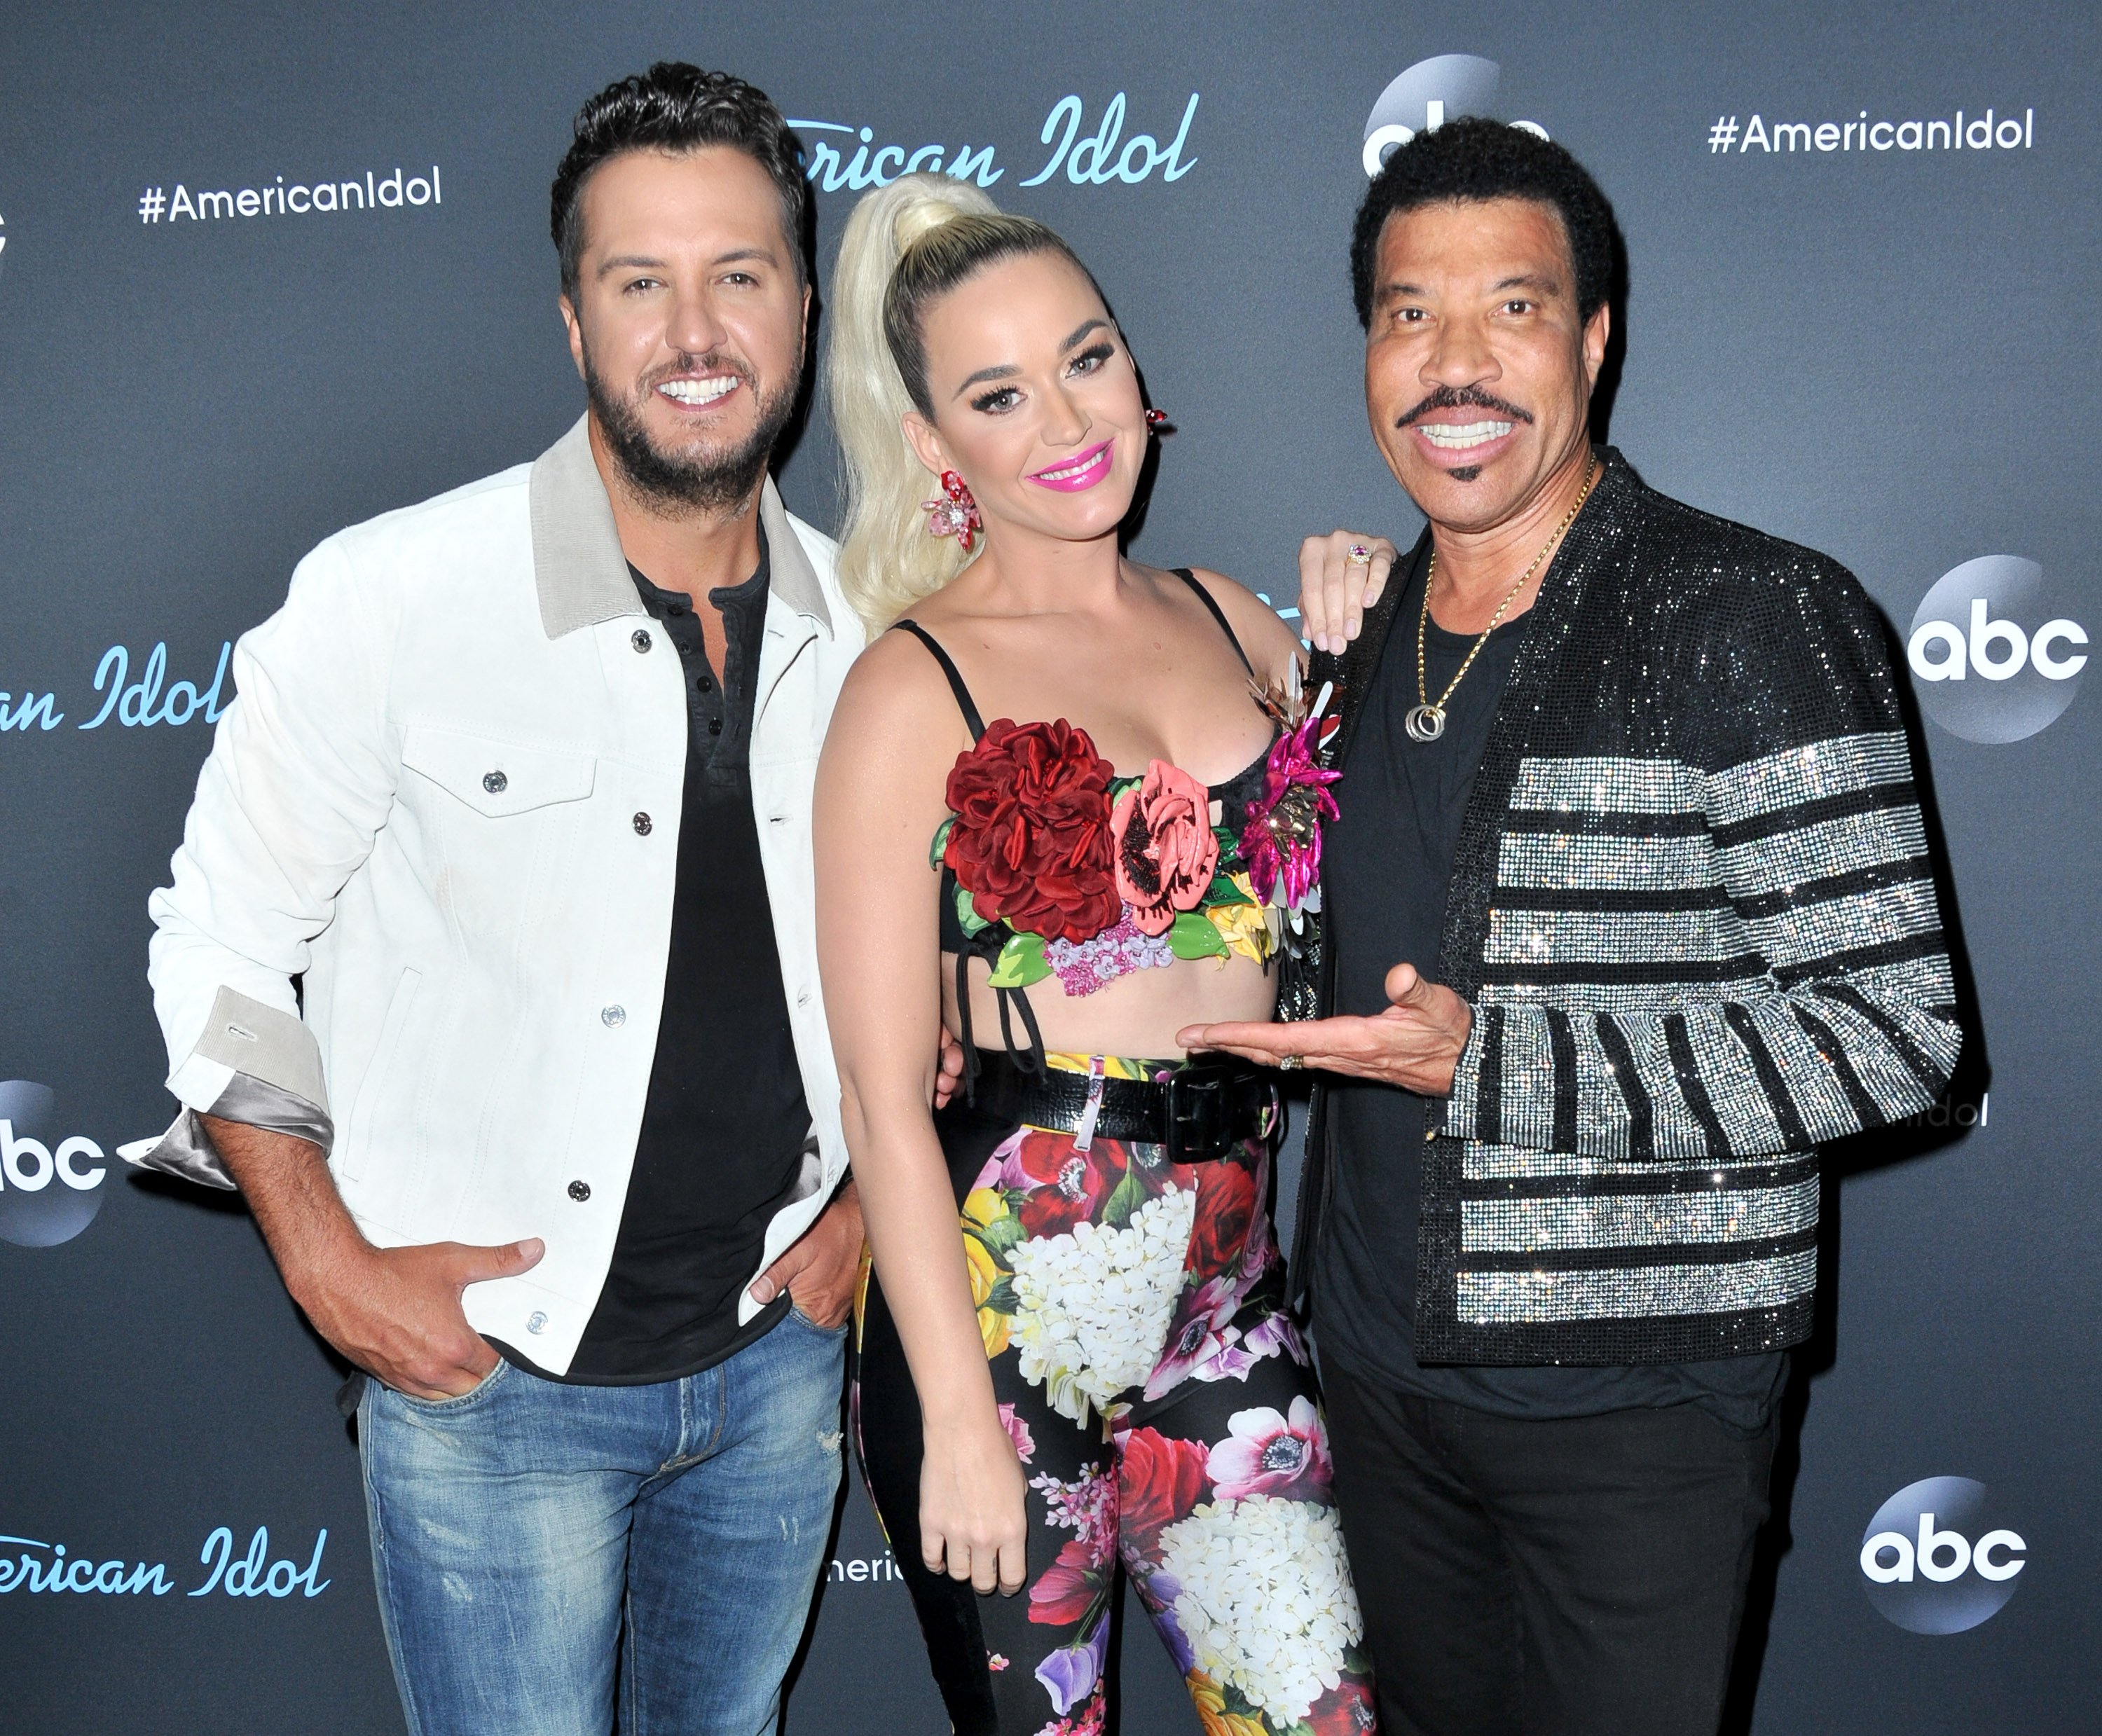 Luke Bryan, Katy Perry, and Lionel Richie post together at an American Idol event.